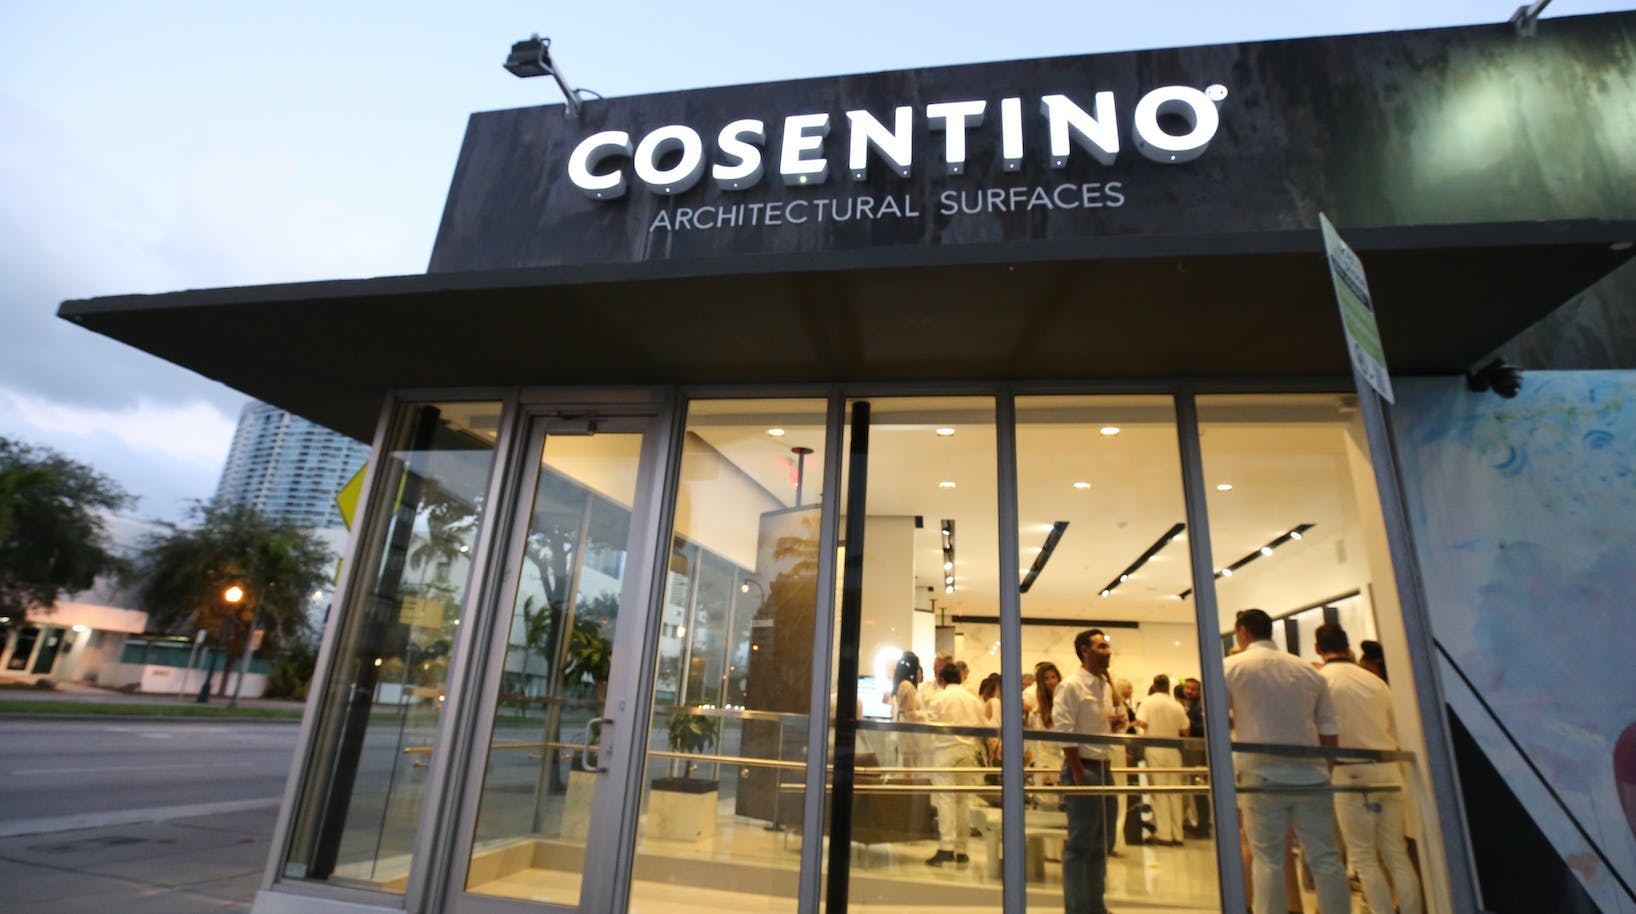 Image 31 of Screen Shot 2019 05 24 at 11.47.47 AM in Cosentino Hosts an All-White Themed Party to Celebrate the First Anniversary of the Miami Cosentino City Showroom - Cosentino